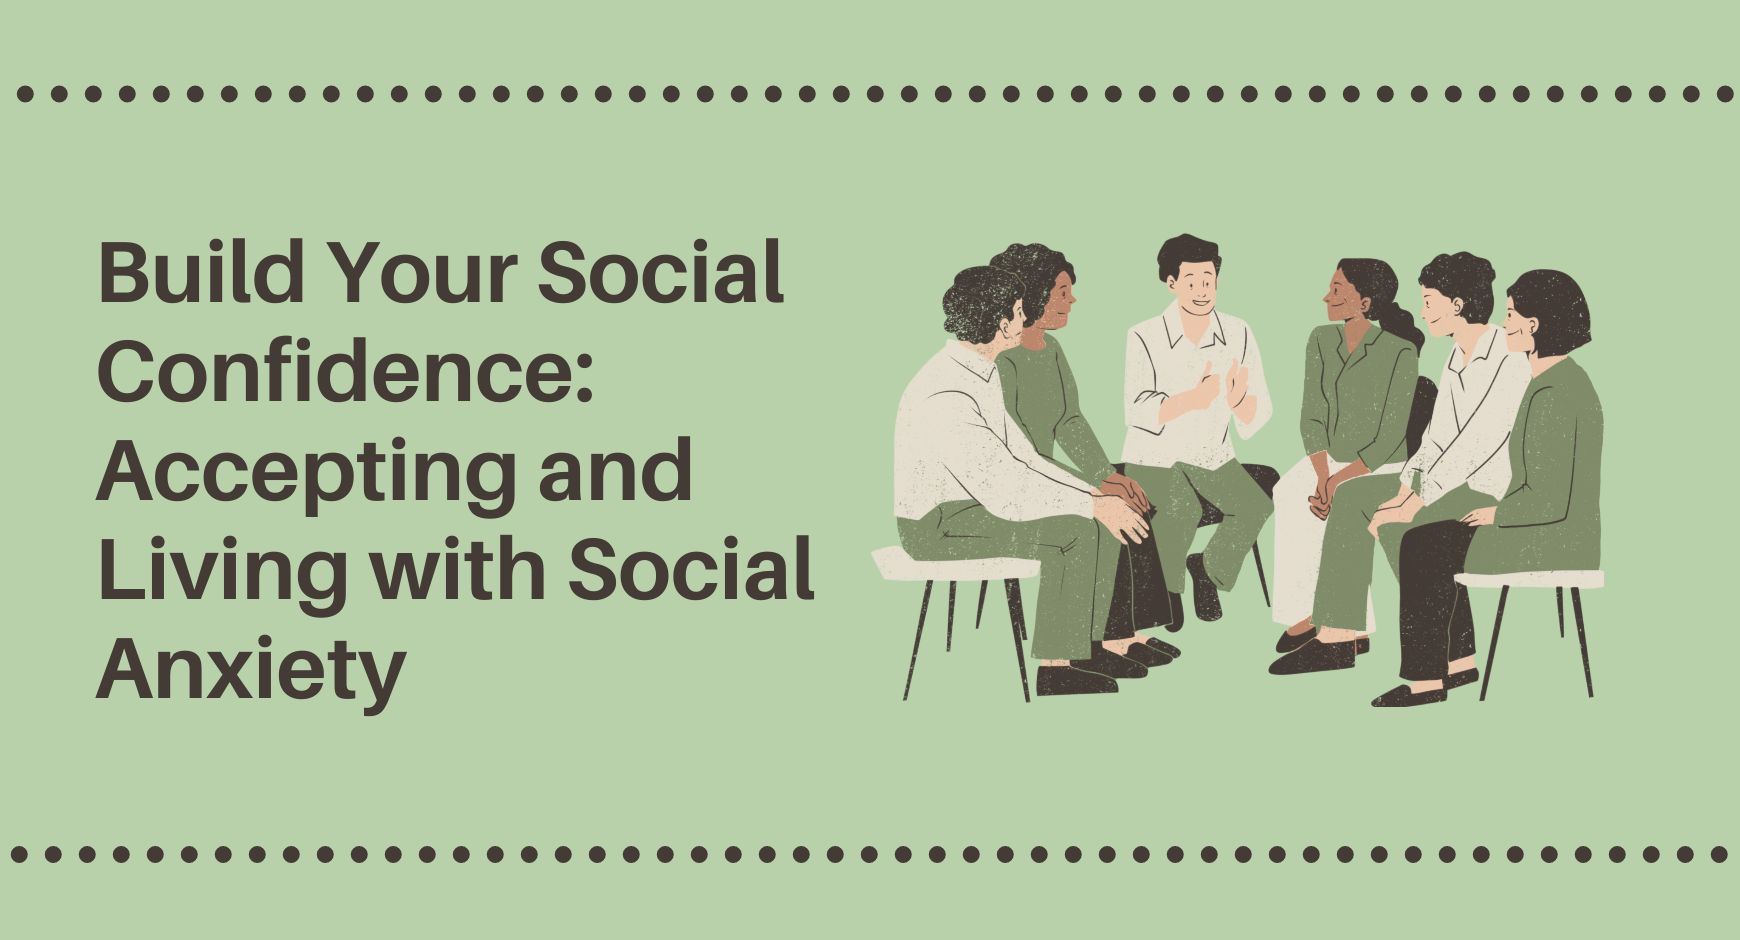 A picture of six people sitting in chairs in a half circle next to words that read "Build Your Social Confidence: Accepting and Living with Social Anxiety"